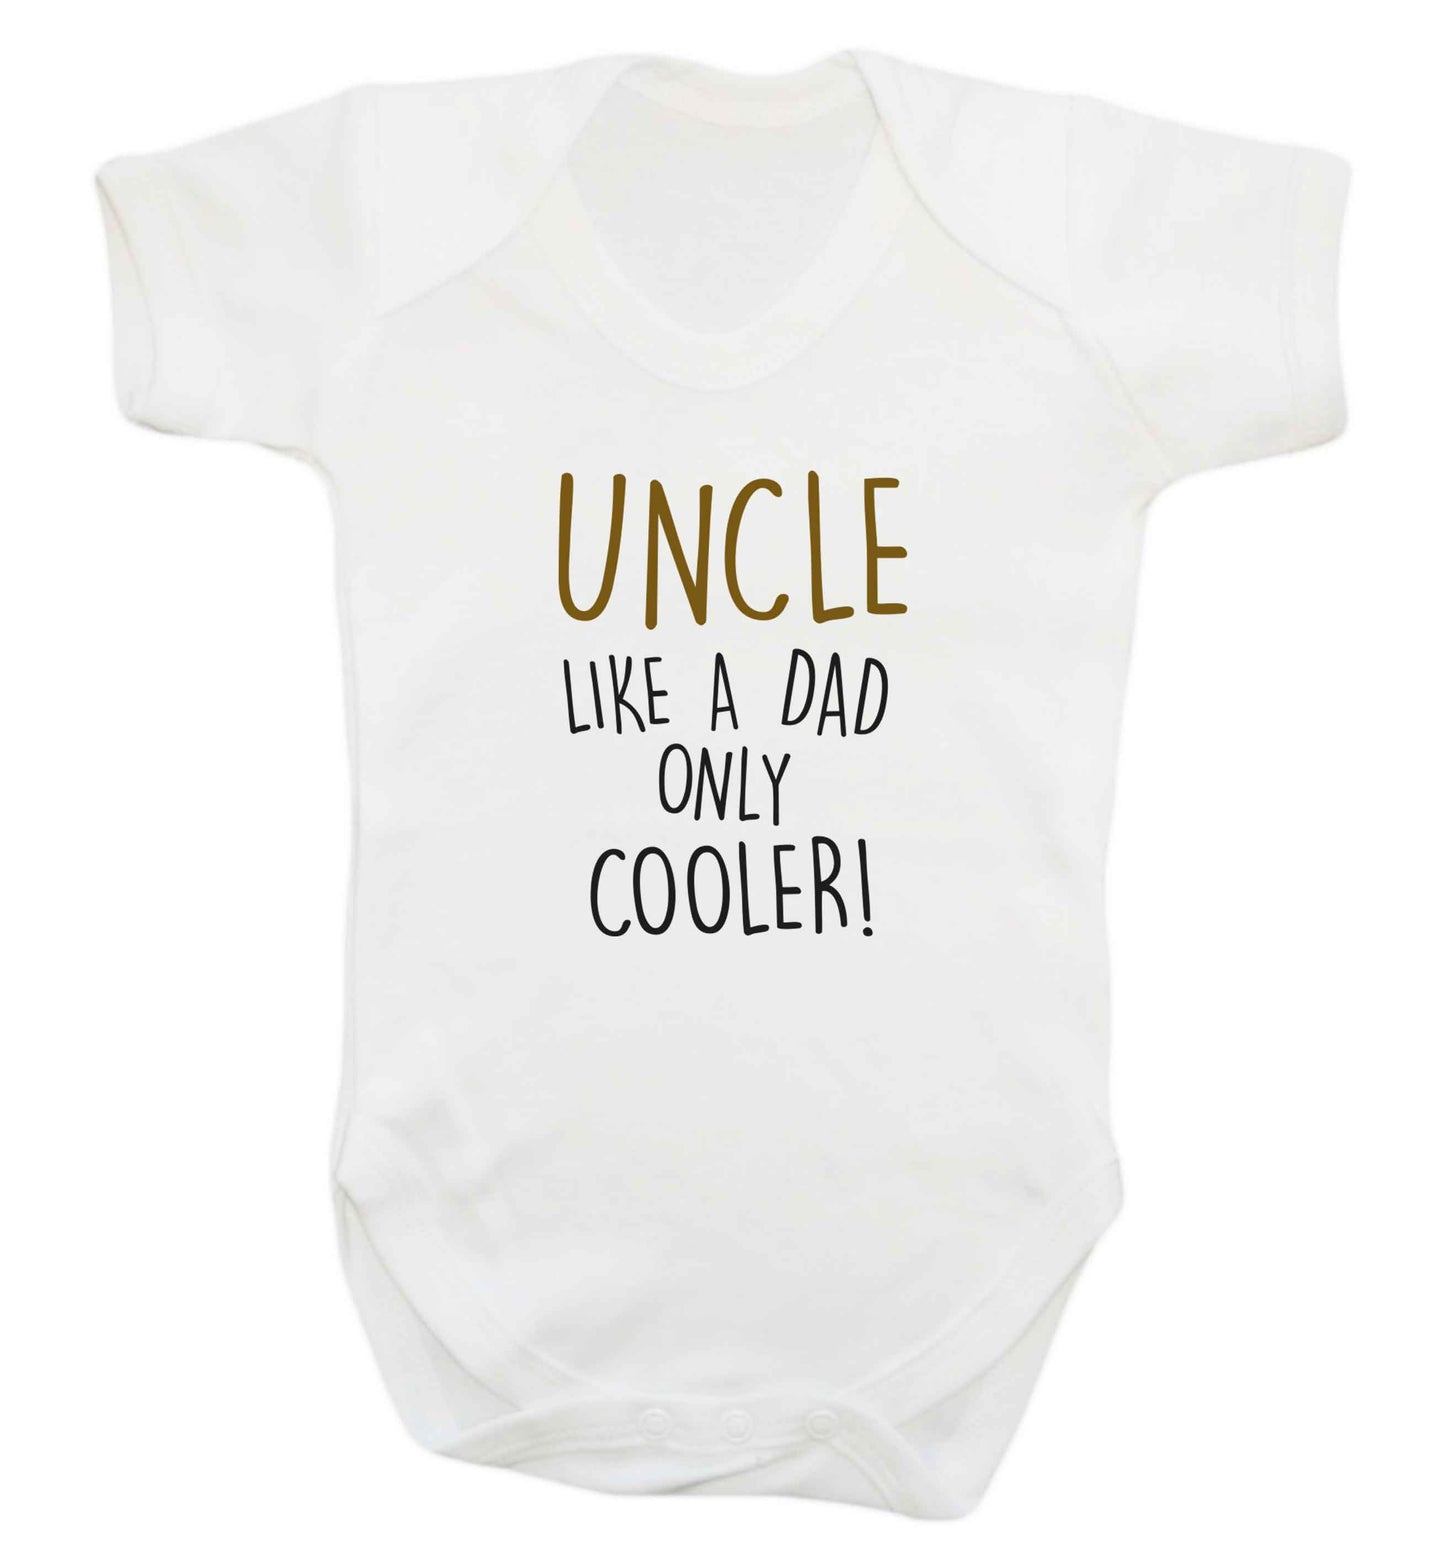 Uncle like a dad only cooler baby vest white 18-24 months